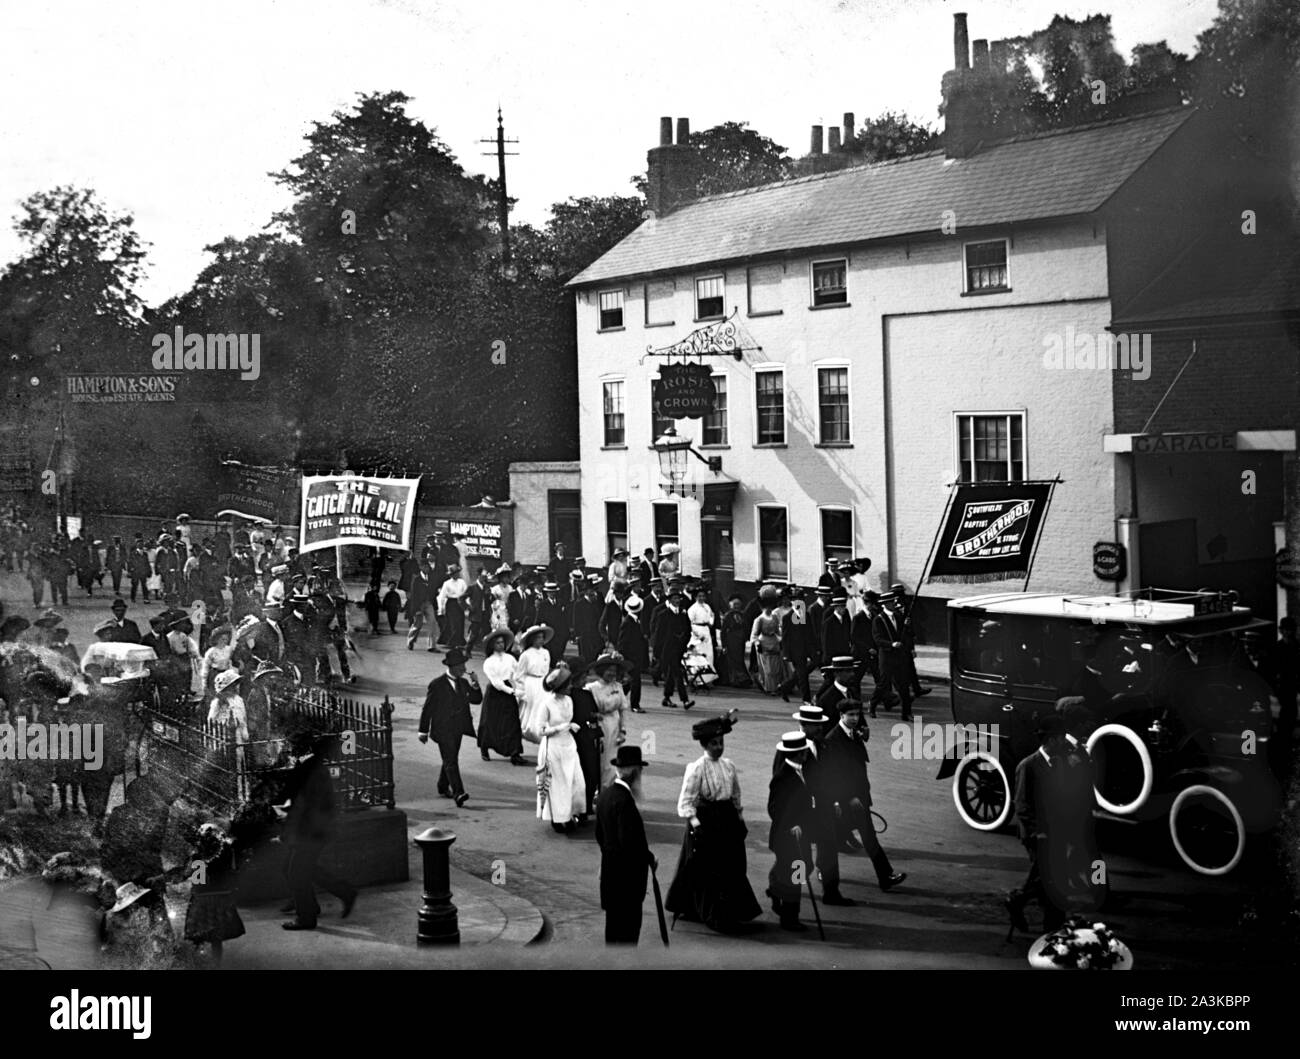 Baptists and other similar groups including the Total Abstinence Association marching past the Rose & Crown pub on the High Street in Wimbledon c1907 Photo by Tony Henshaw Archive Stock Photo